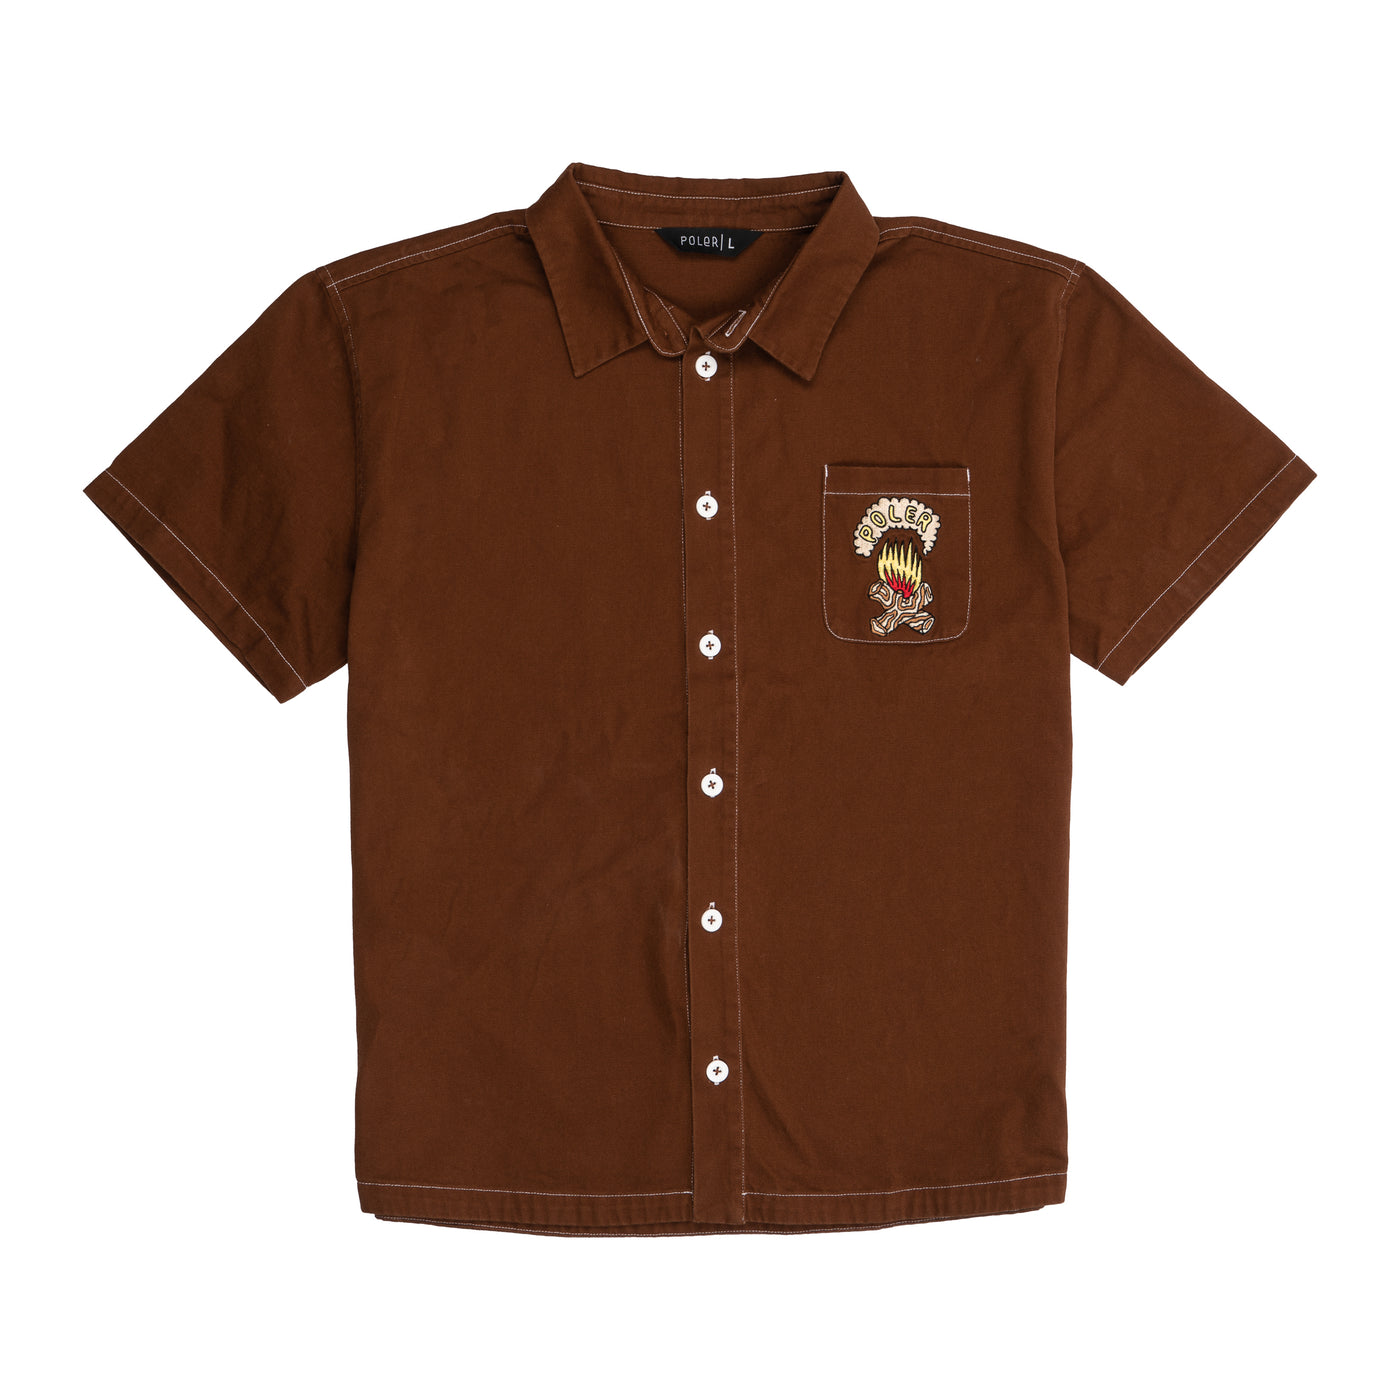 Intern Button Up product LOGGERBROWN S 